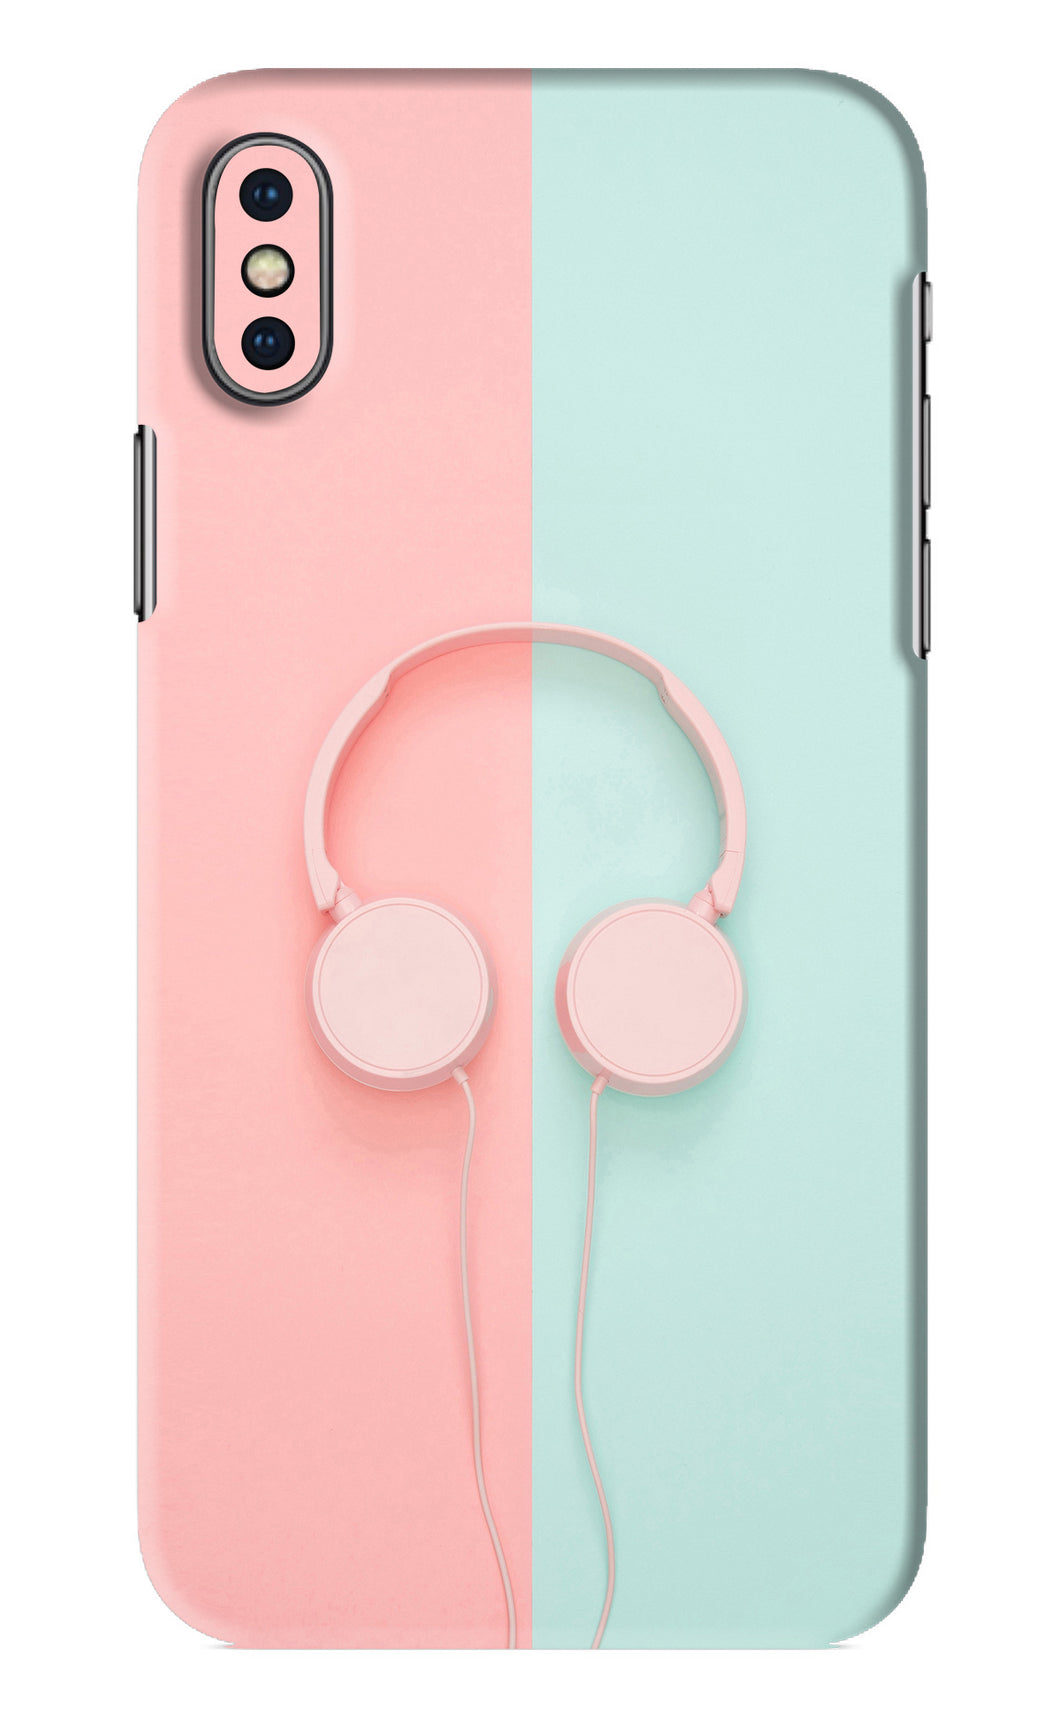 Music Lover iPhone XS Back Skin Wrap